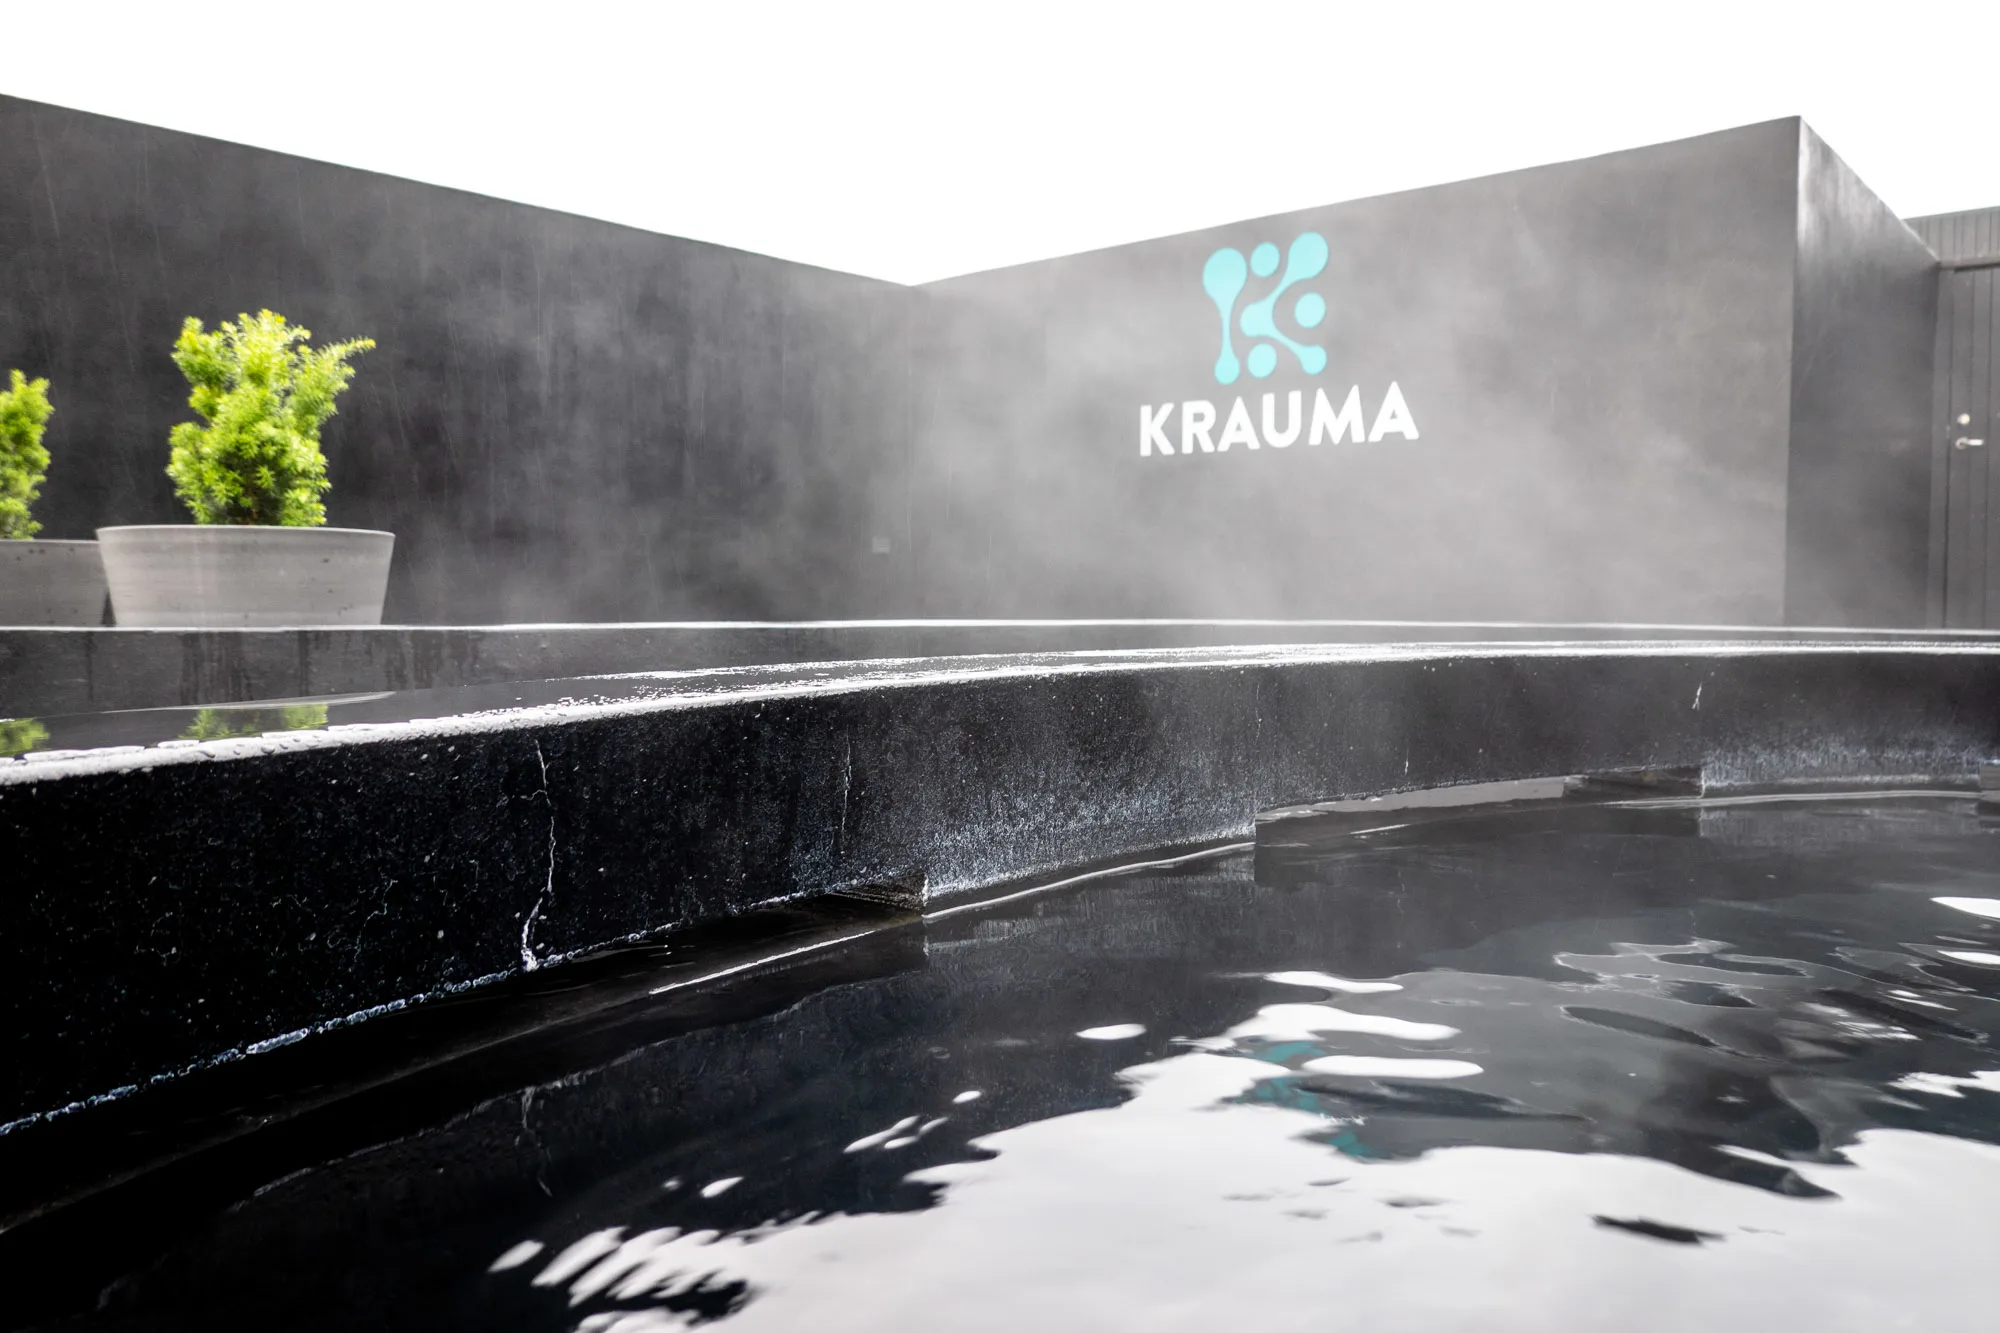 Black geothermal pool surrounded by black walls with a sign for "Krauma"